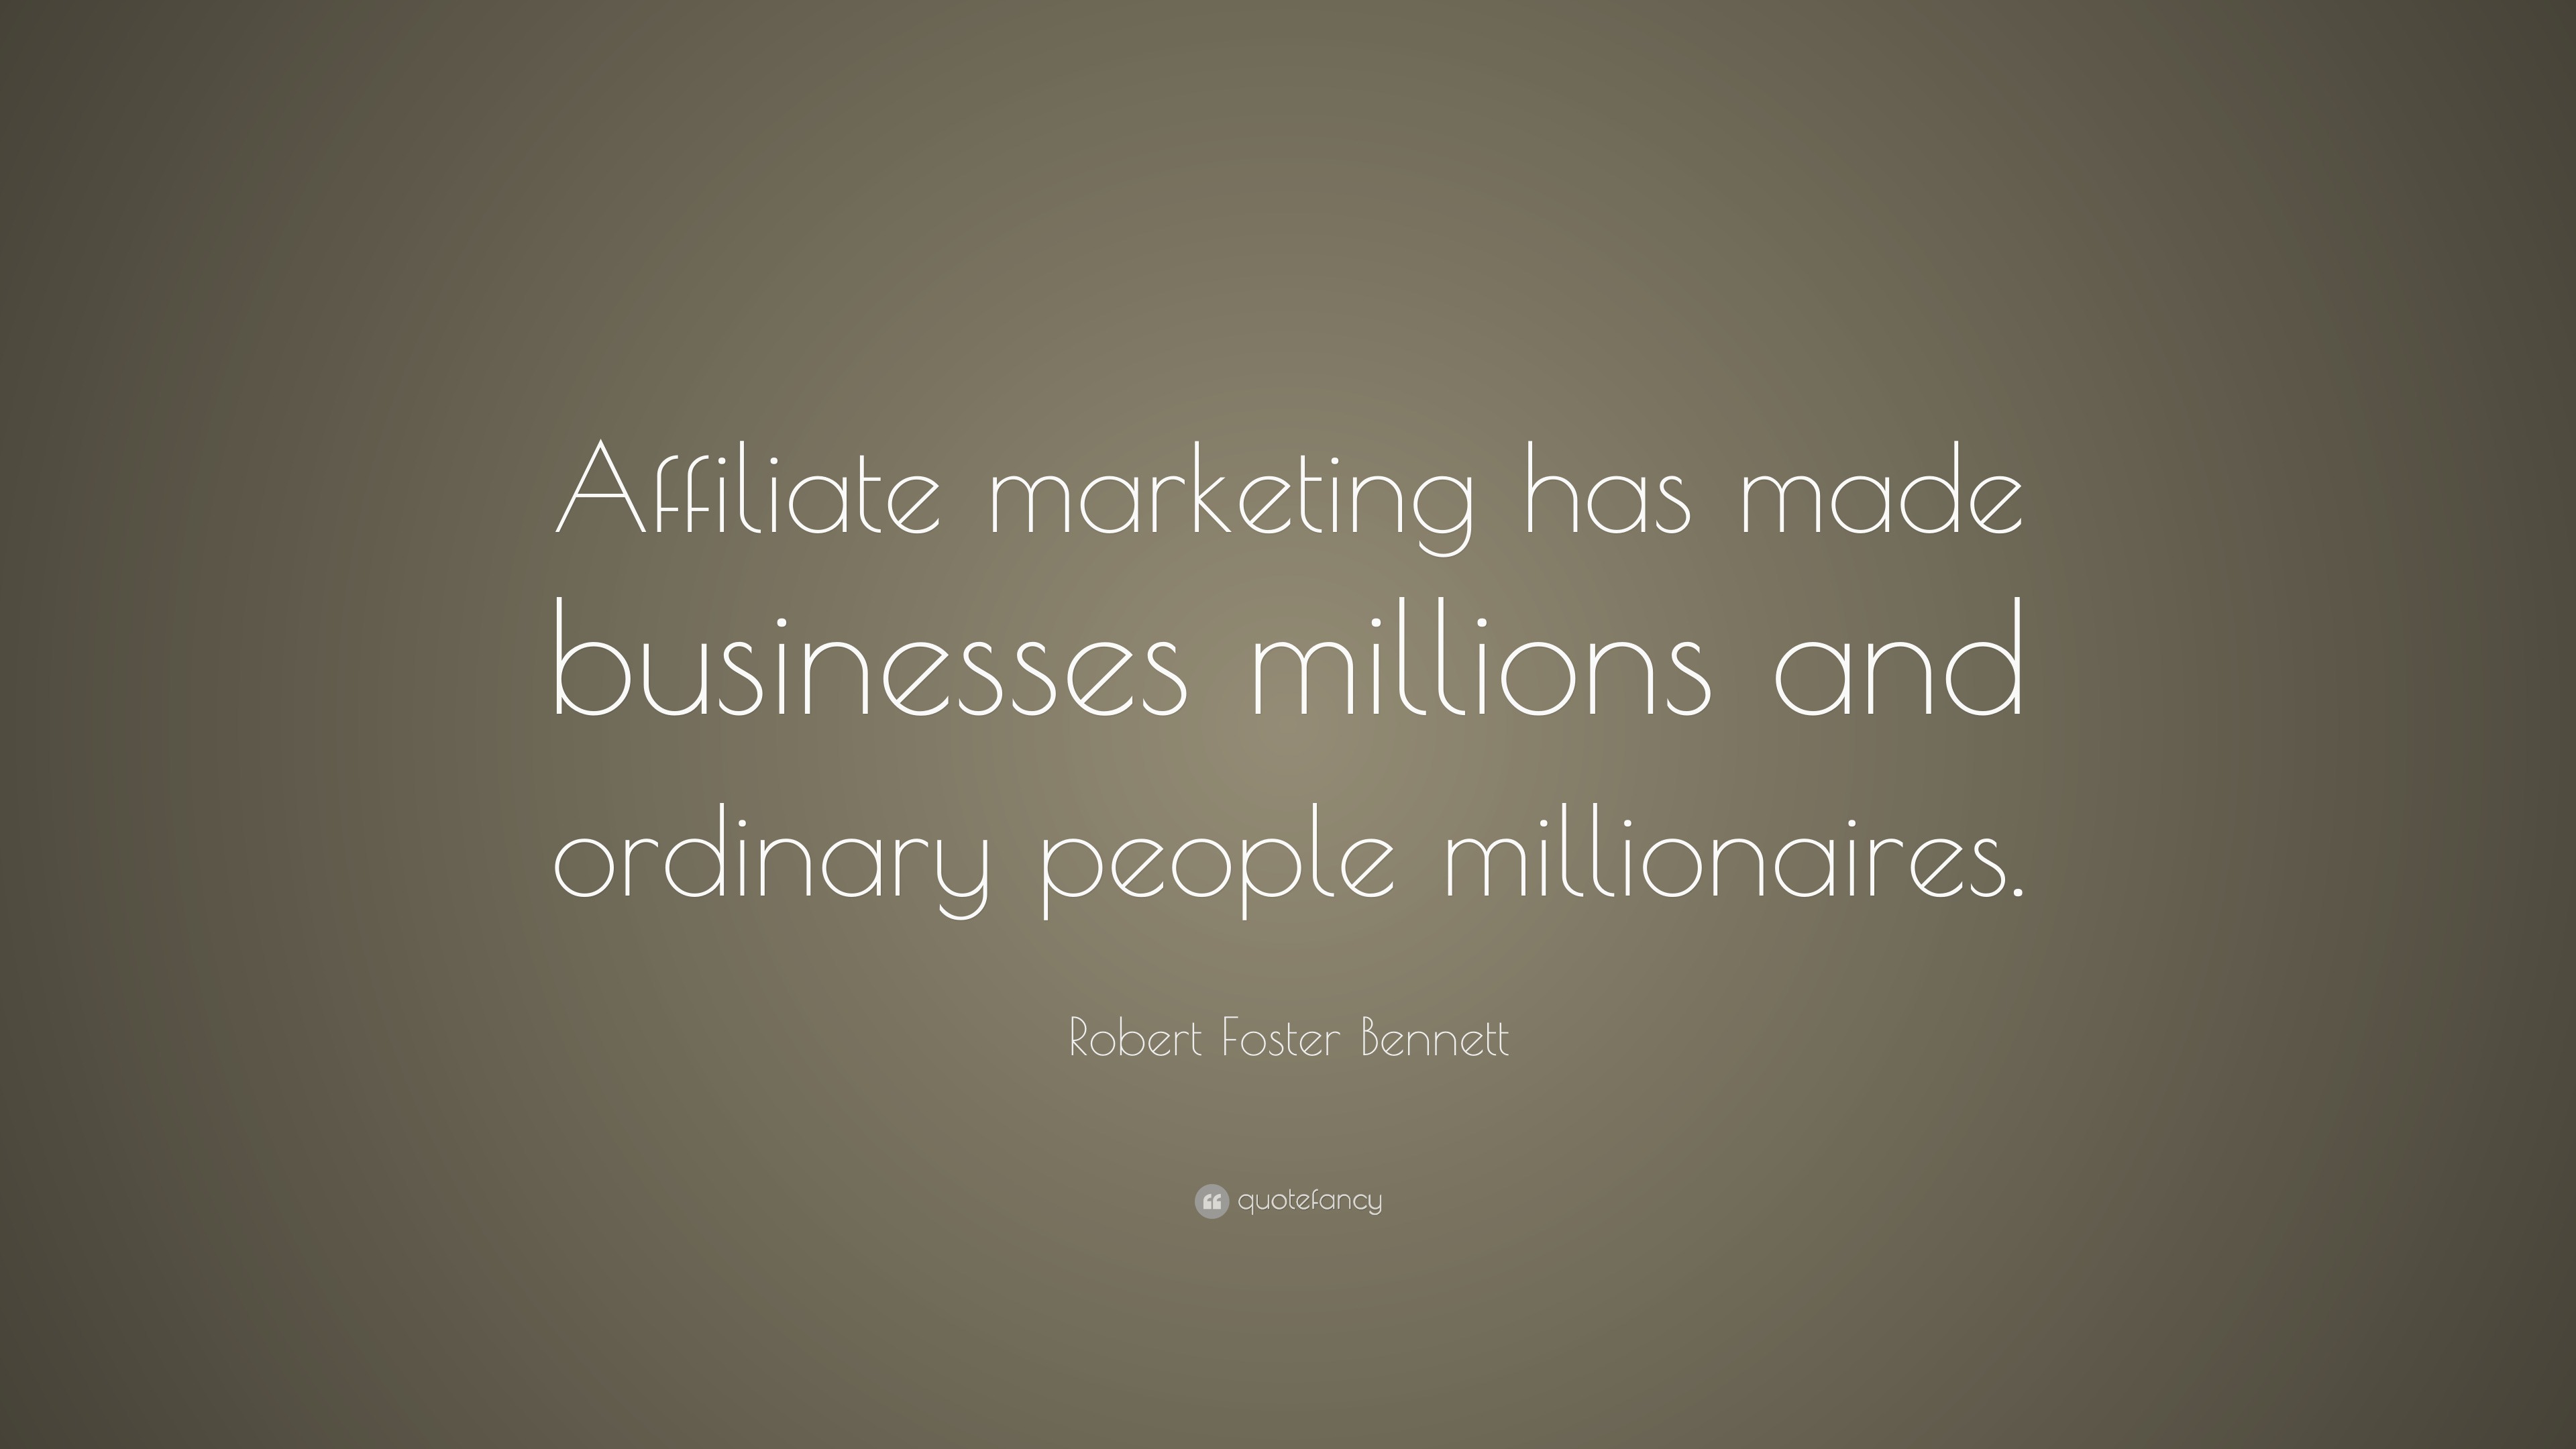 Robert Foster Bennett Quote: “Affiliate marketing has made businesses ...